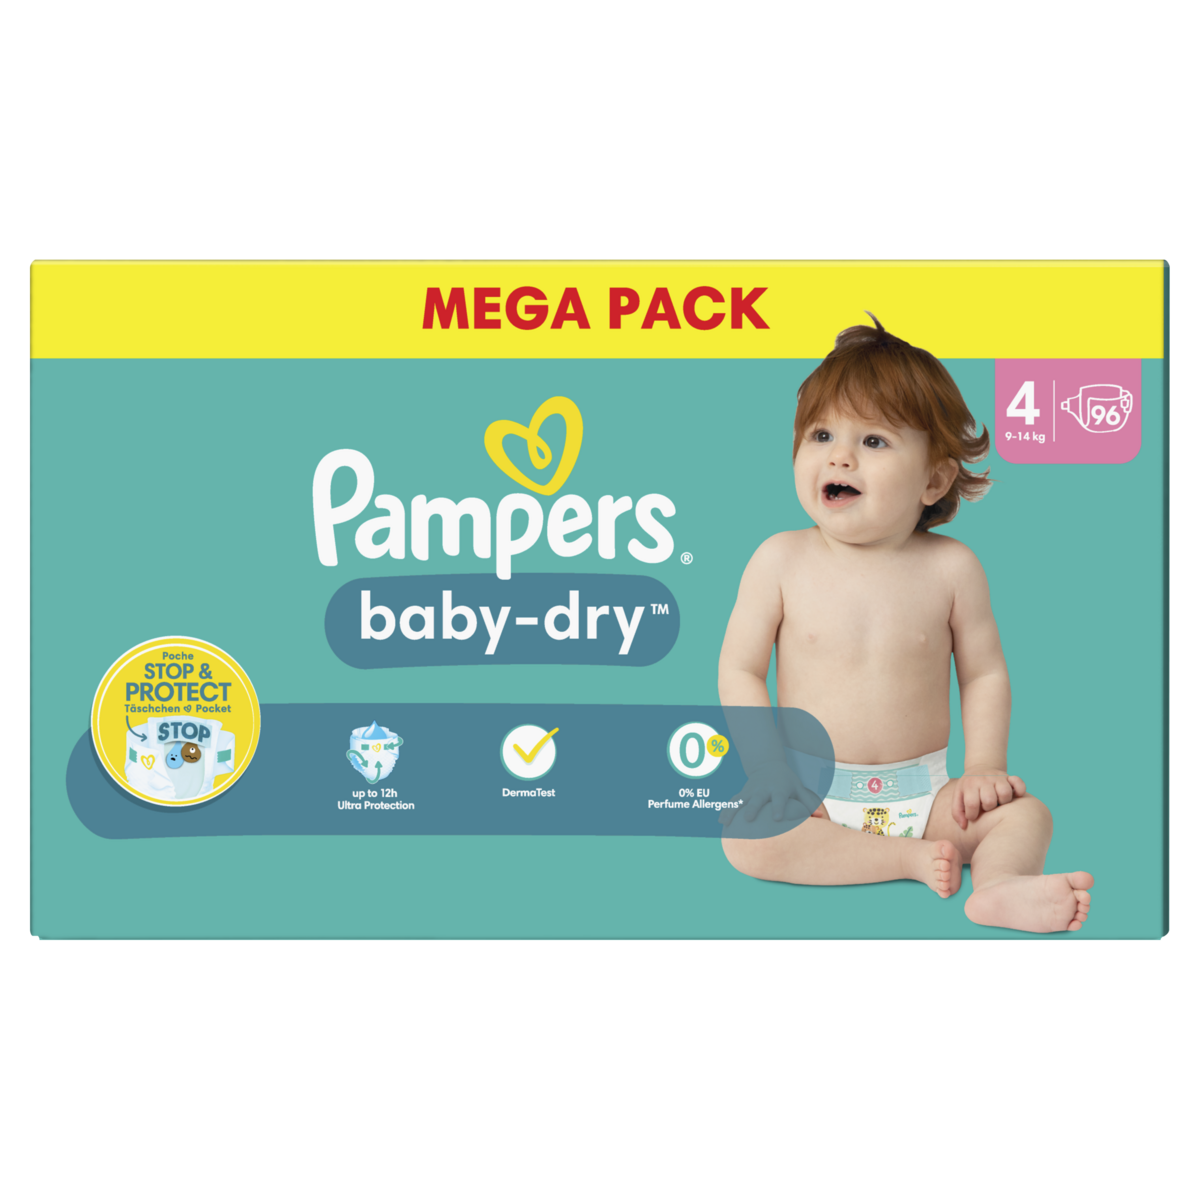 CHANGES BABY DRY MÉGA PAMPERS